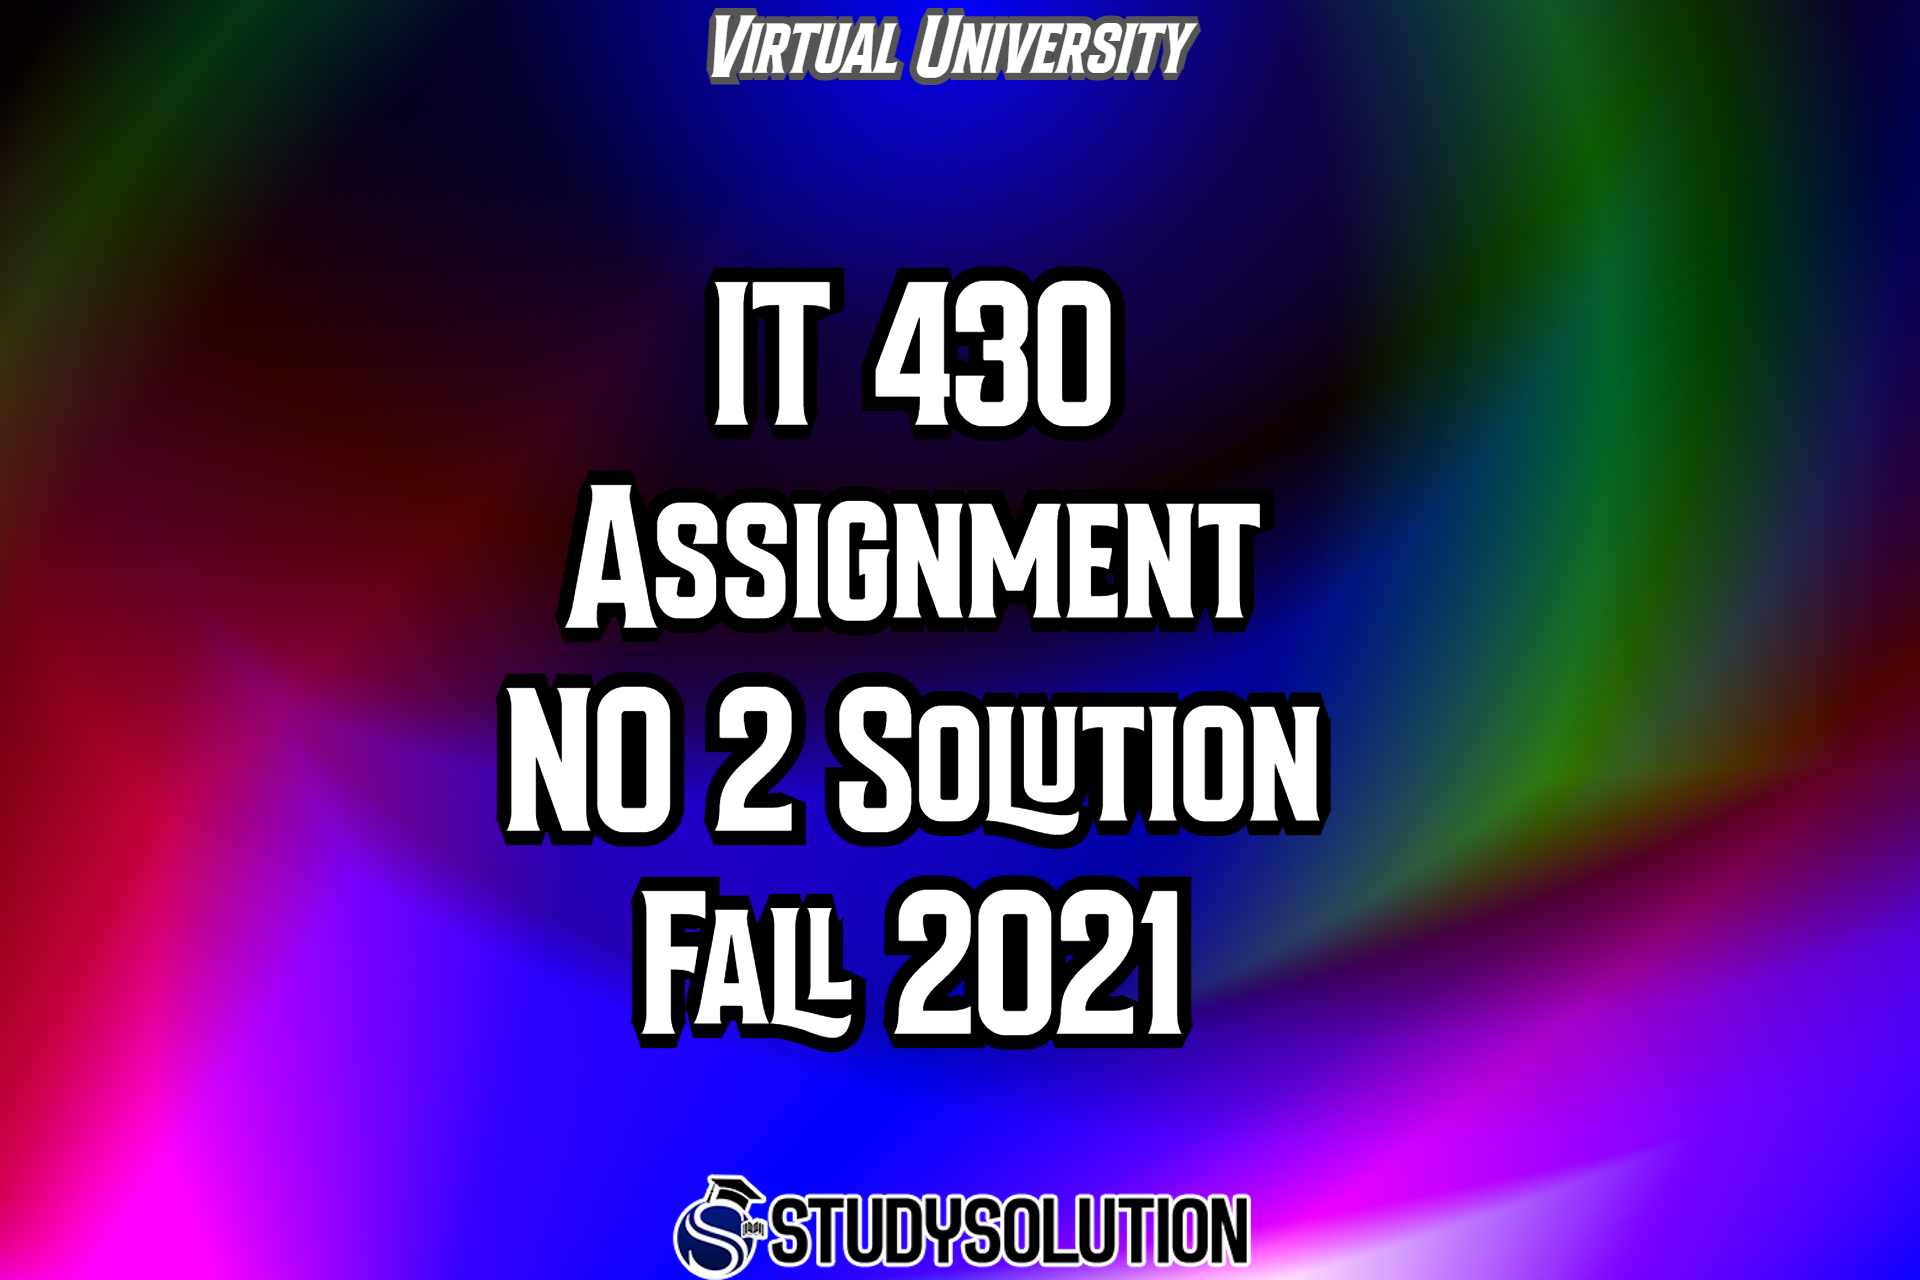 IT430 Assignment NO 2 Solution Fall 2021